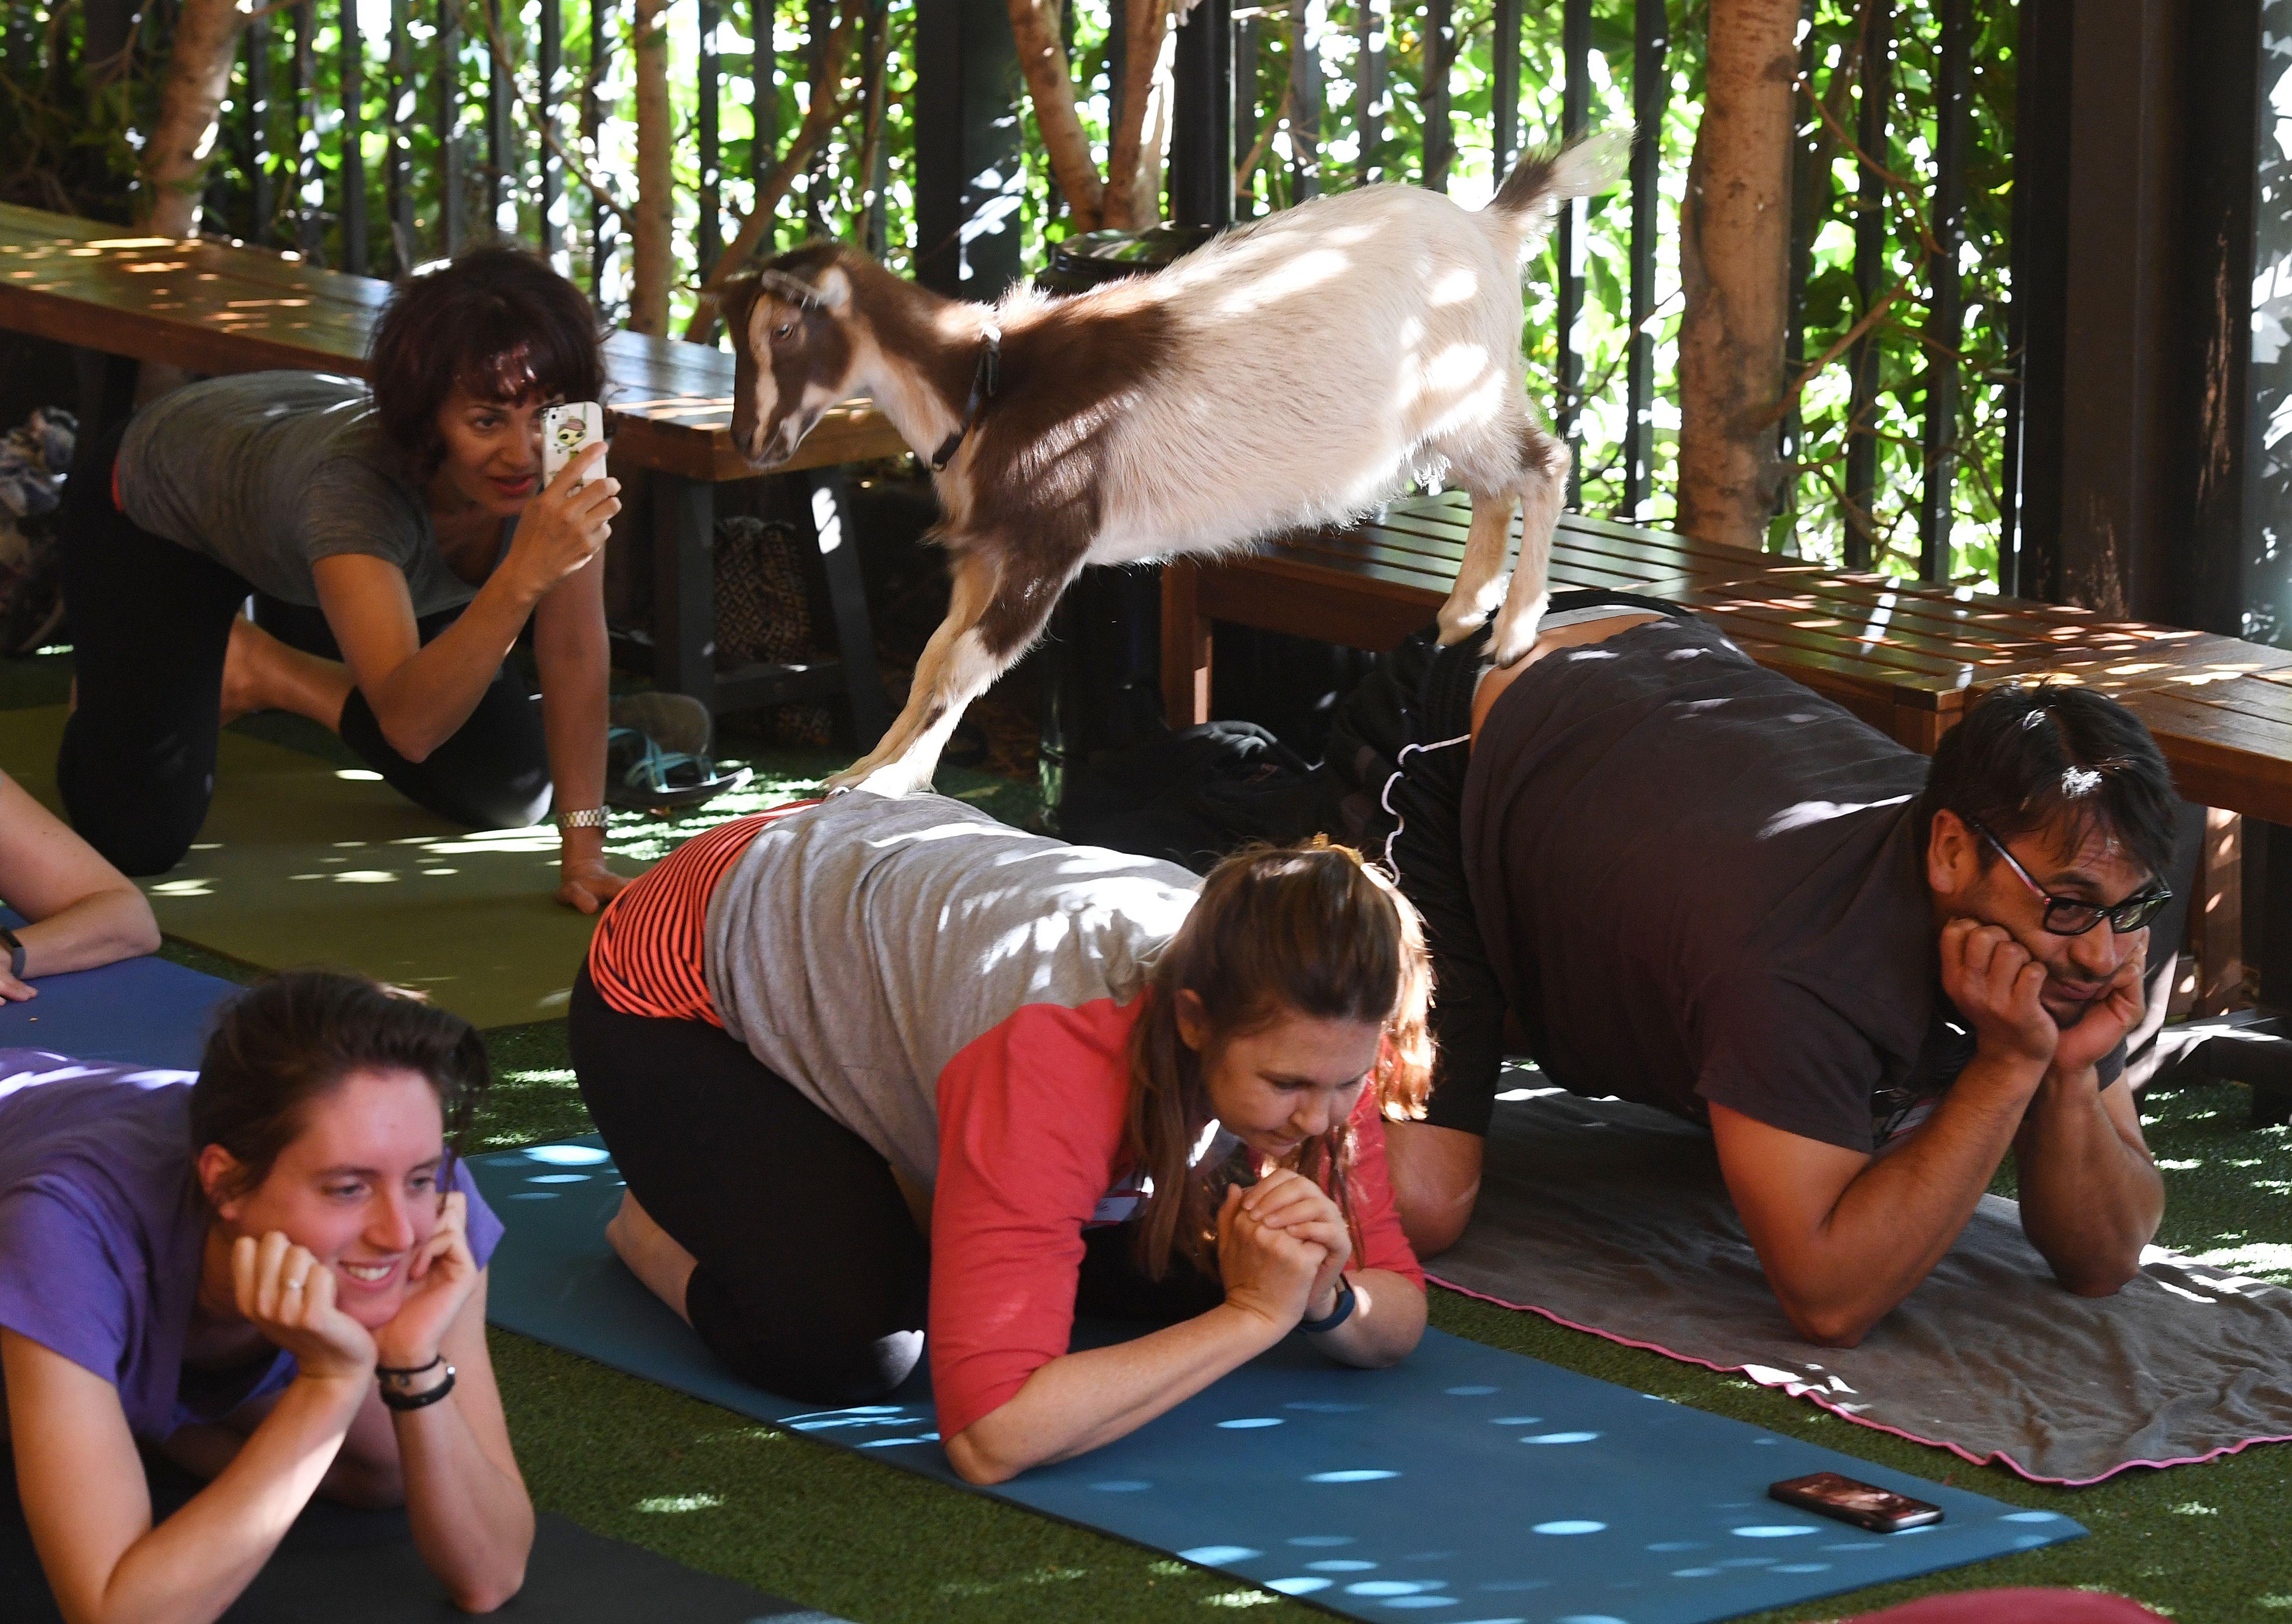 Popular goat yoga available near Charlotte — $25 class includes 30 minutes  of cuddle time with goats - Axios Charlotte